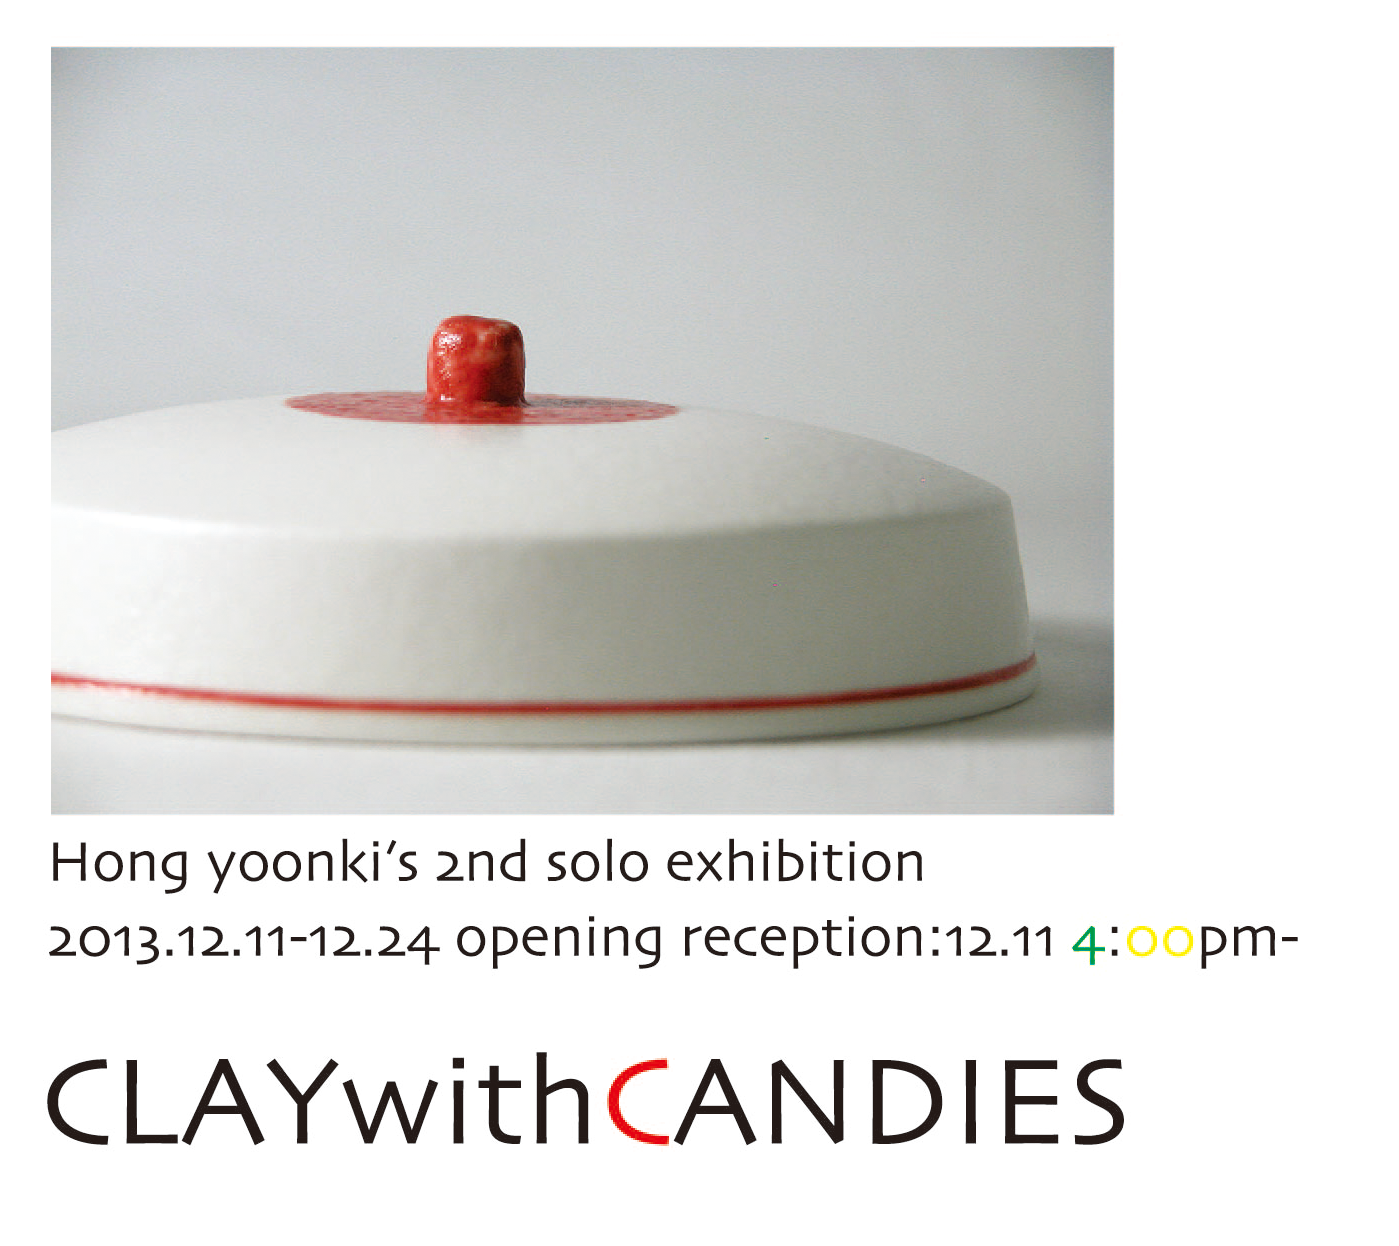 "Clay with Candies" • 2nd Solo Exhibition by Yoonki Hong • 11-24 Dec 2013